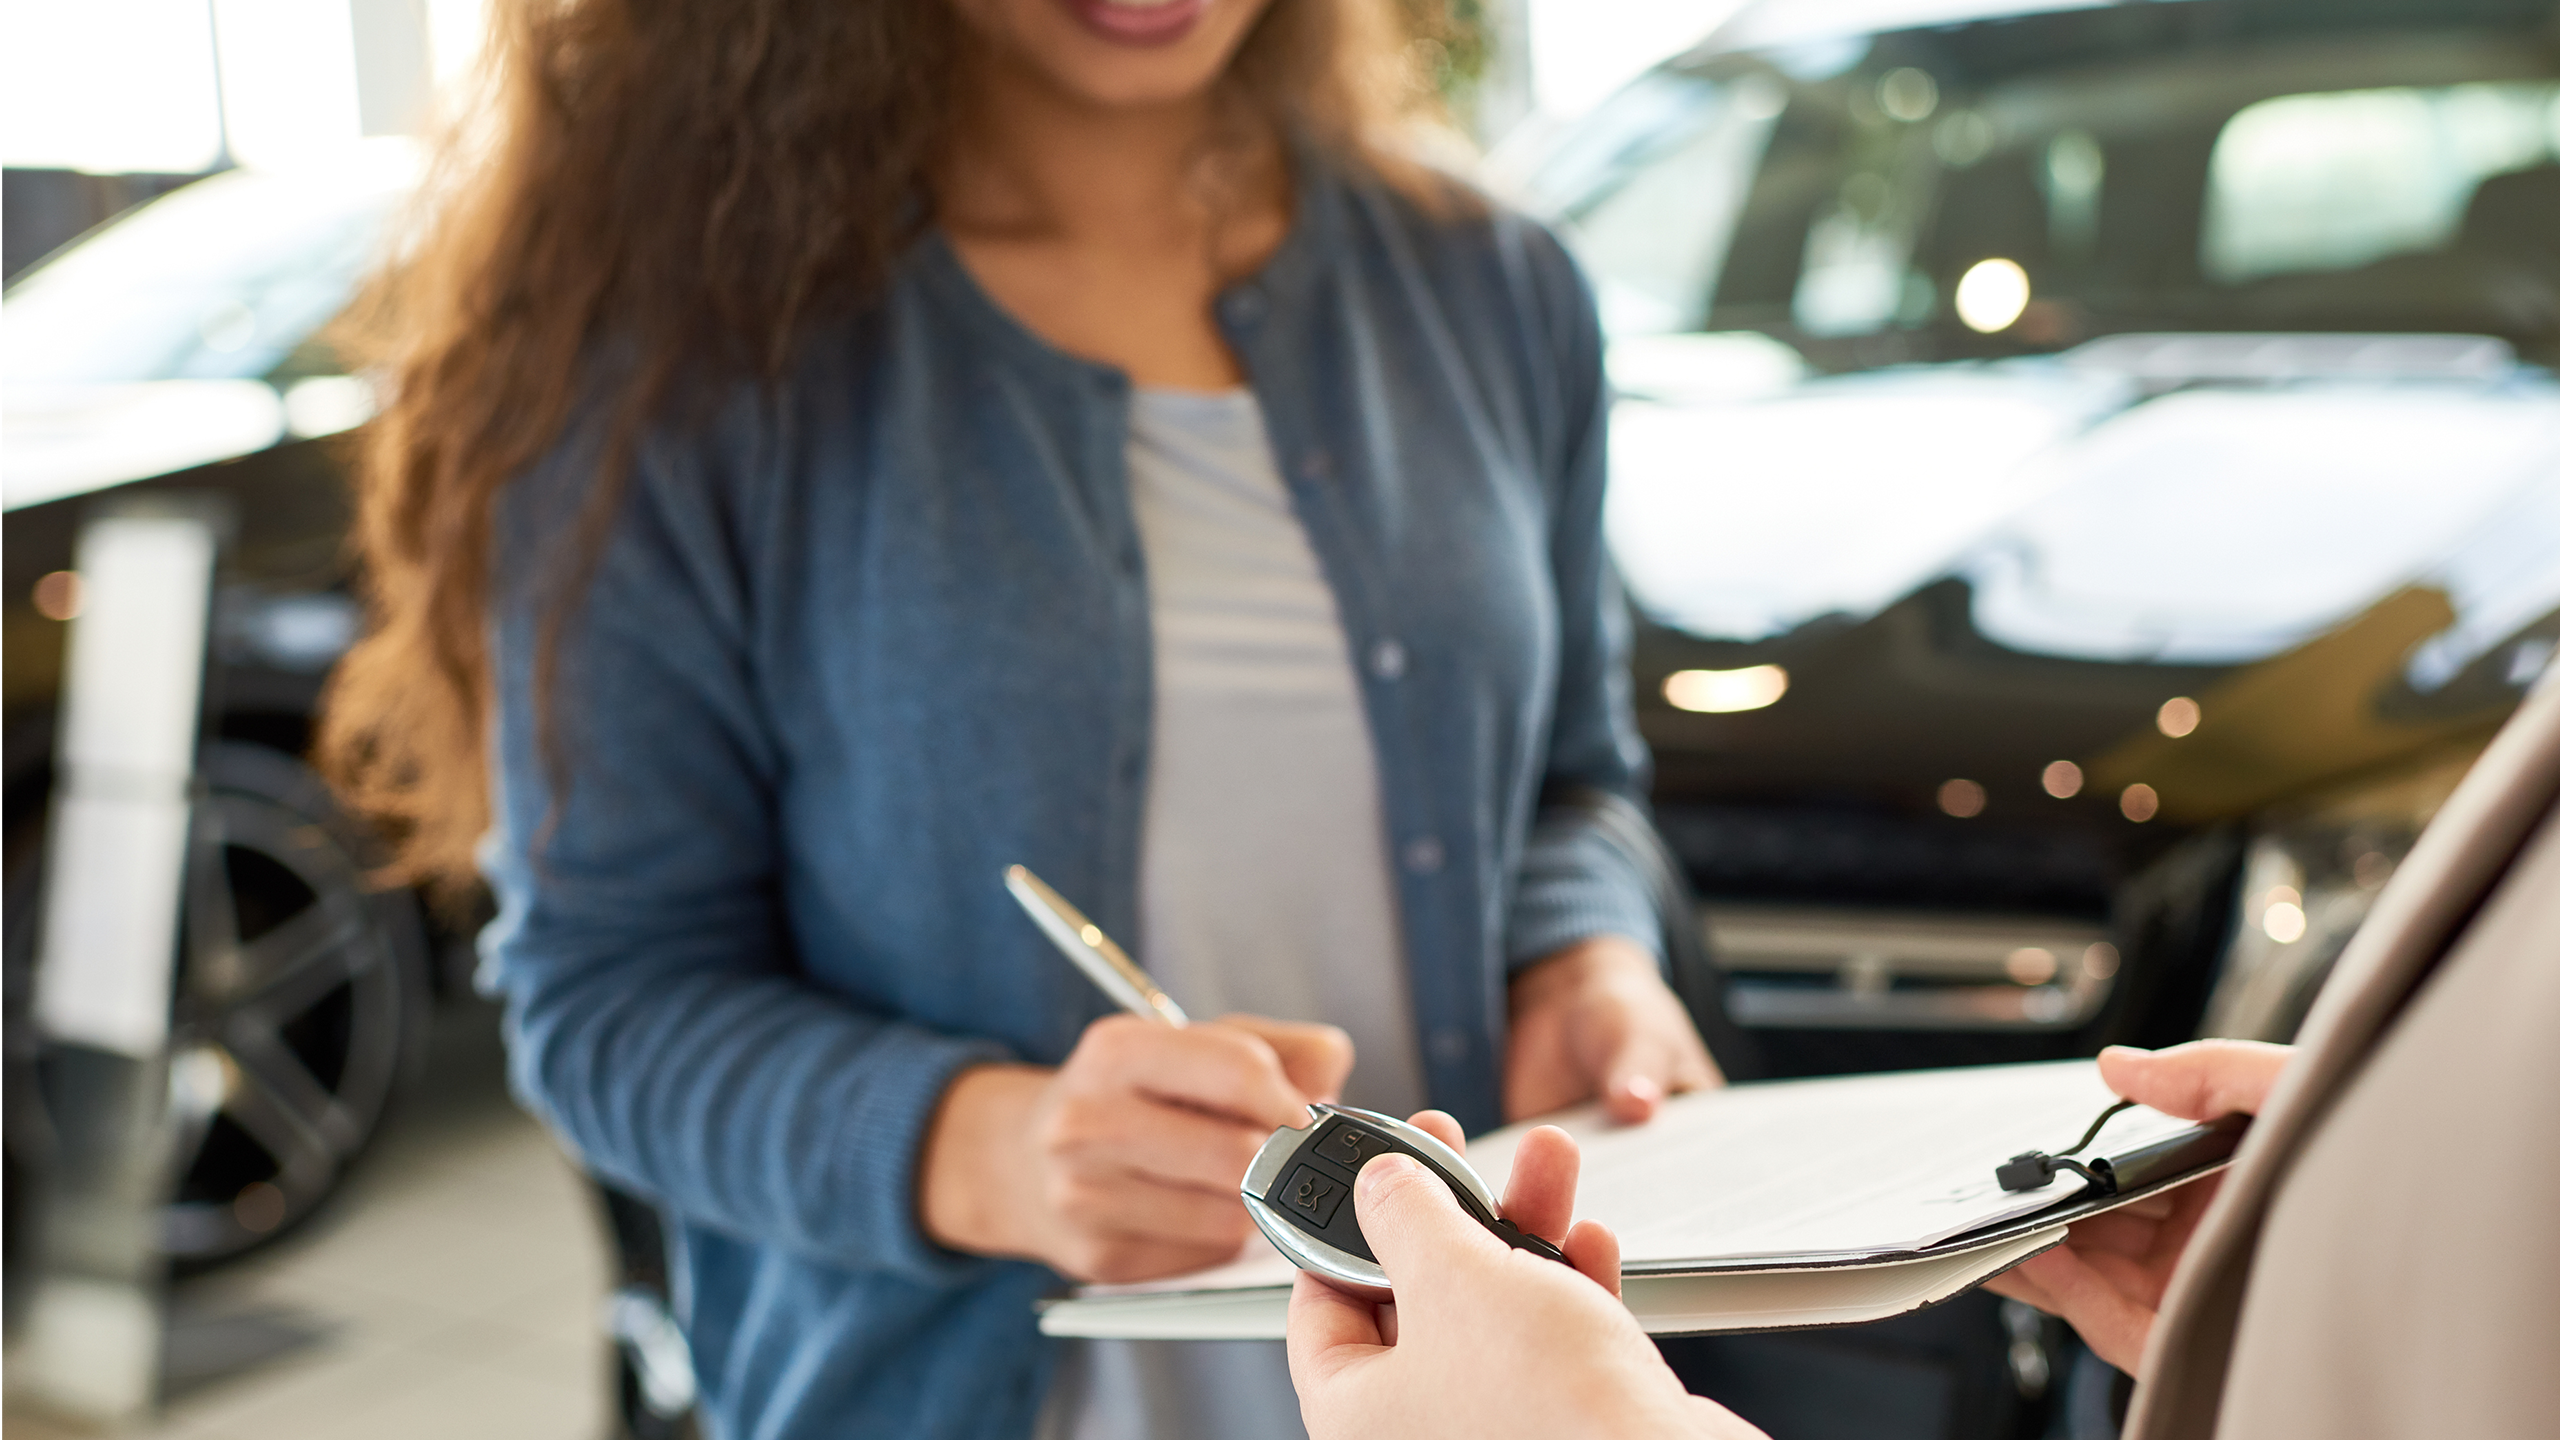 Questions You Should Always Ask When Buying a Car